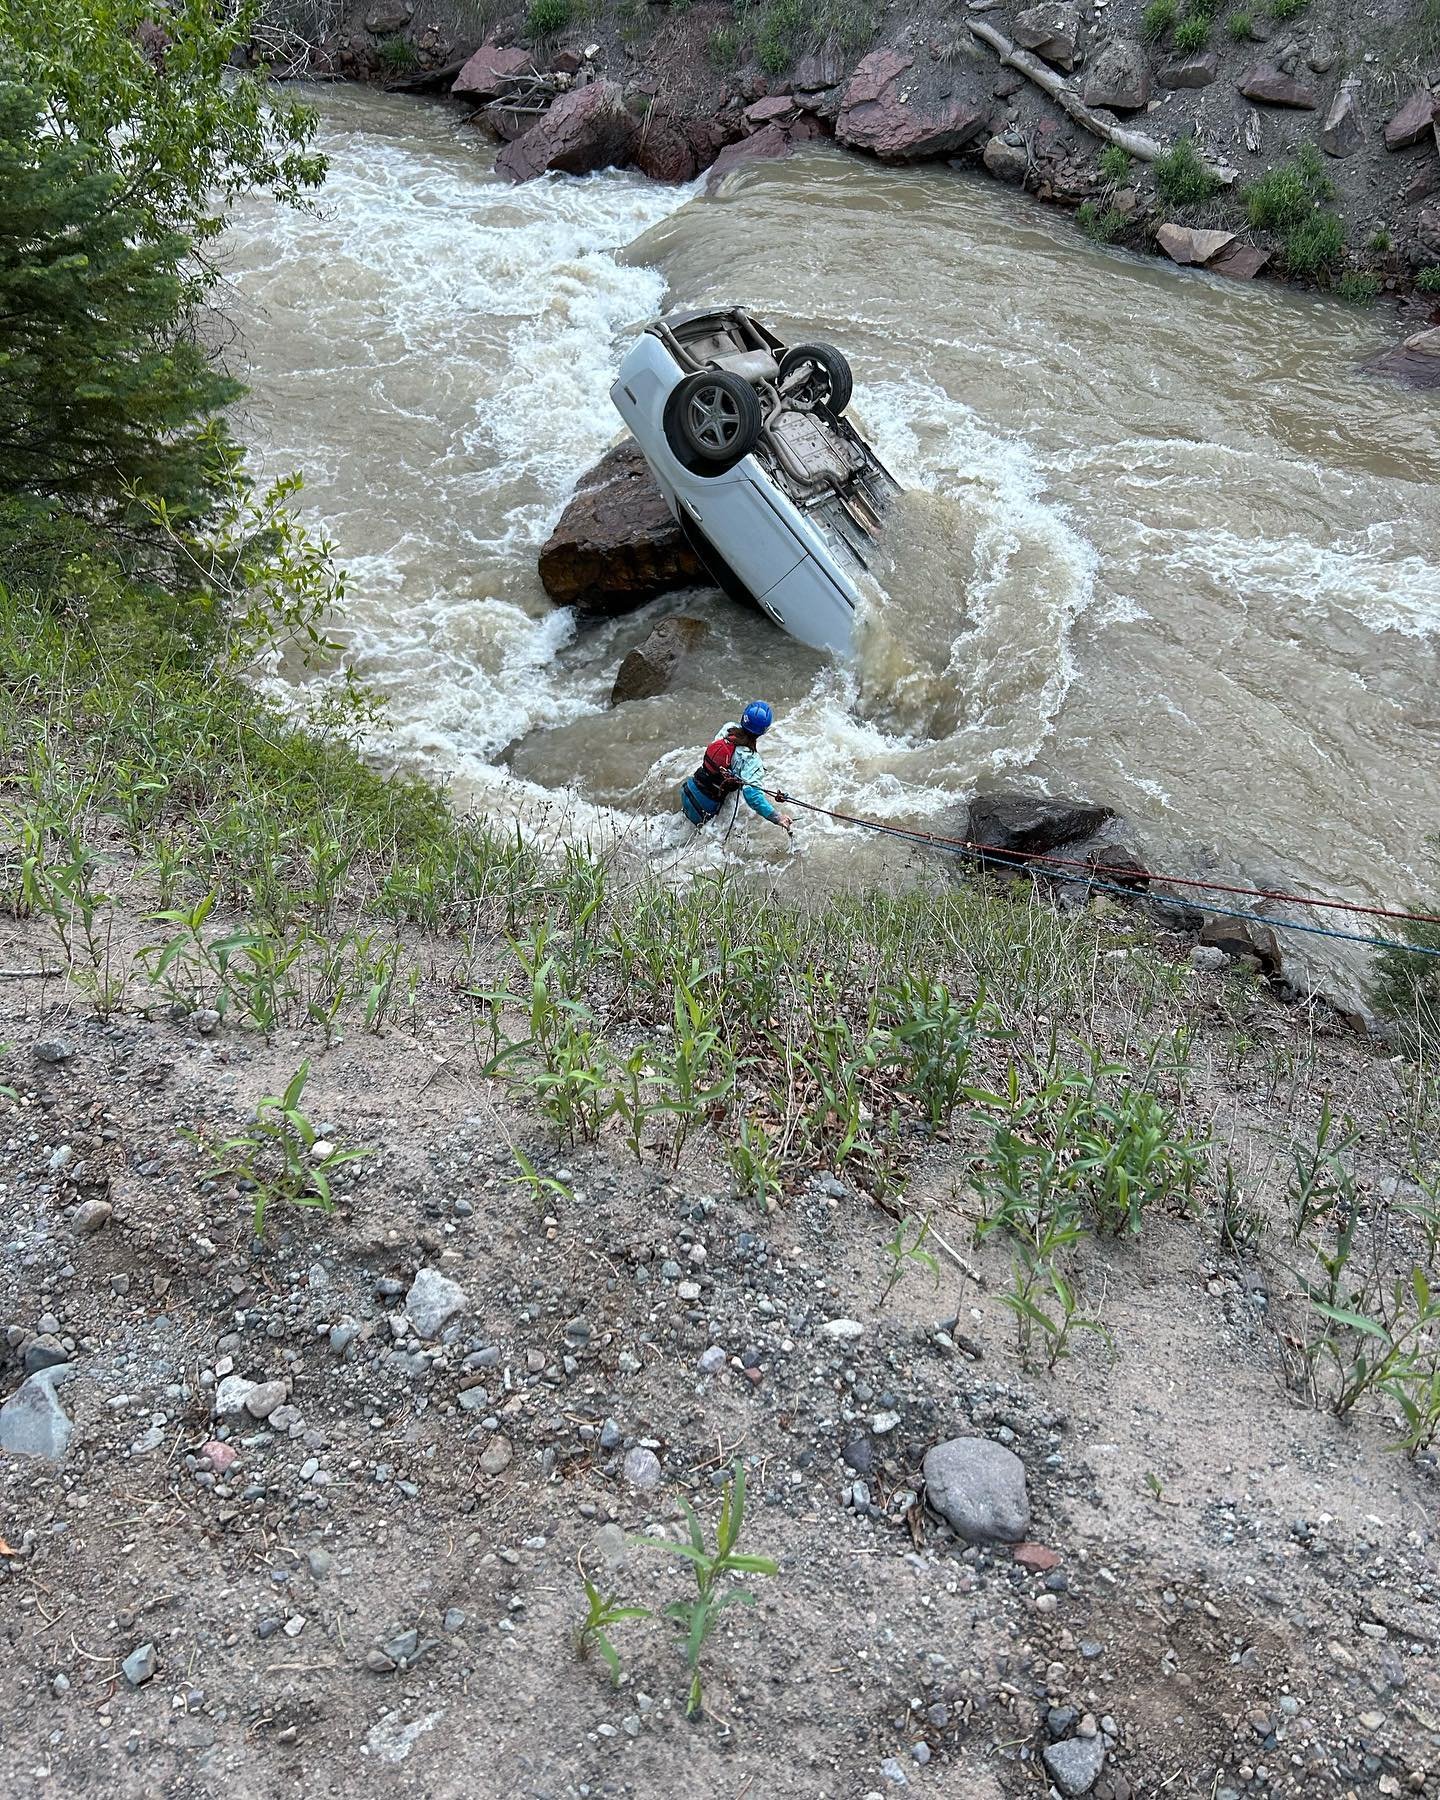 On Thursday, the Ouray Mountain Rescue Team responded to a vehicle in the Uncompahgre River just north of the town of Ouray. Our deepest condolences go to the family and friends of the victim of this tragic accident. Thanks to all of the other Ouray 